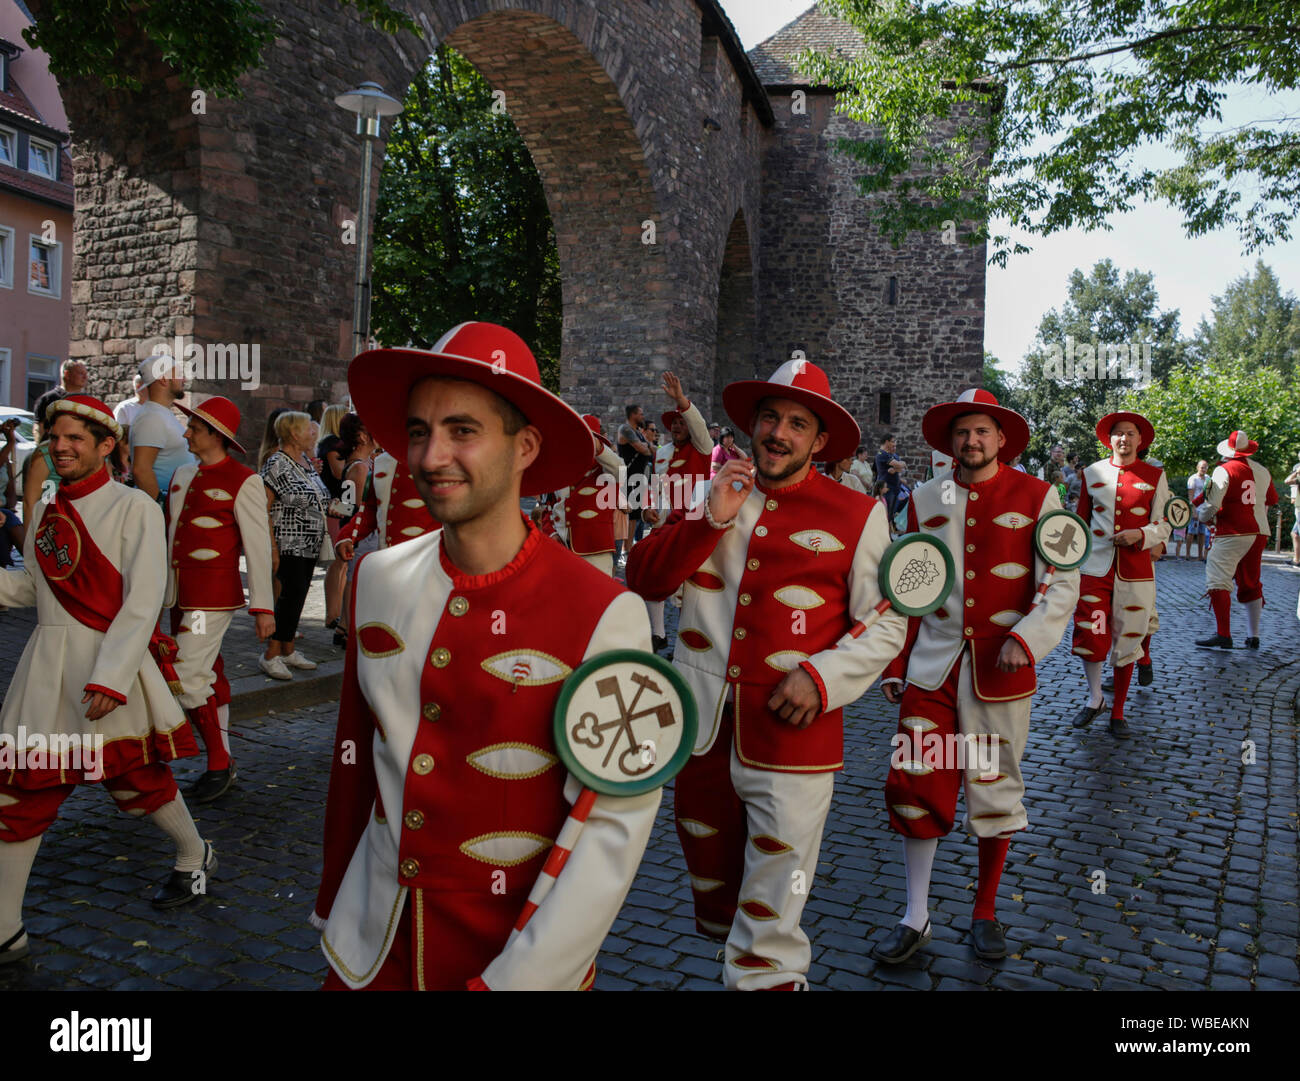 Worms, Germany. 25th August 2019. Journeymen march in the parade in traditional costume. The first highlight of the 2019 Backfischfest was the big parade through the city of Worms with over 70 groups and floats. Community groups, music groups and businesses from Worms and further afield took part. Stock Photo